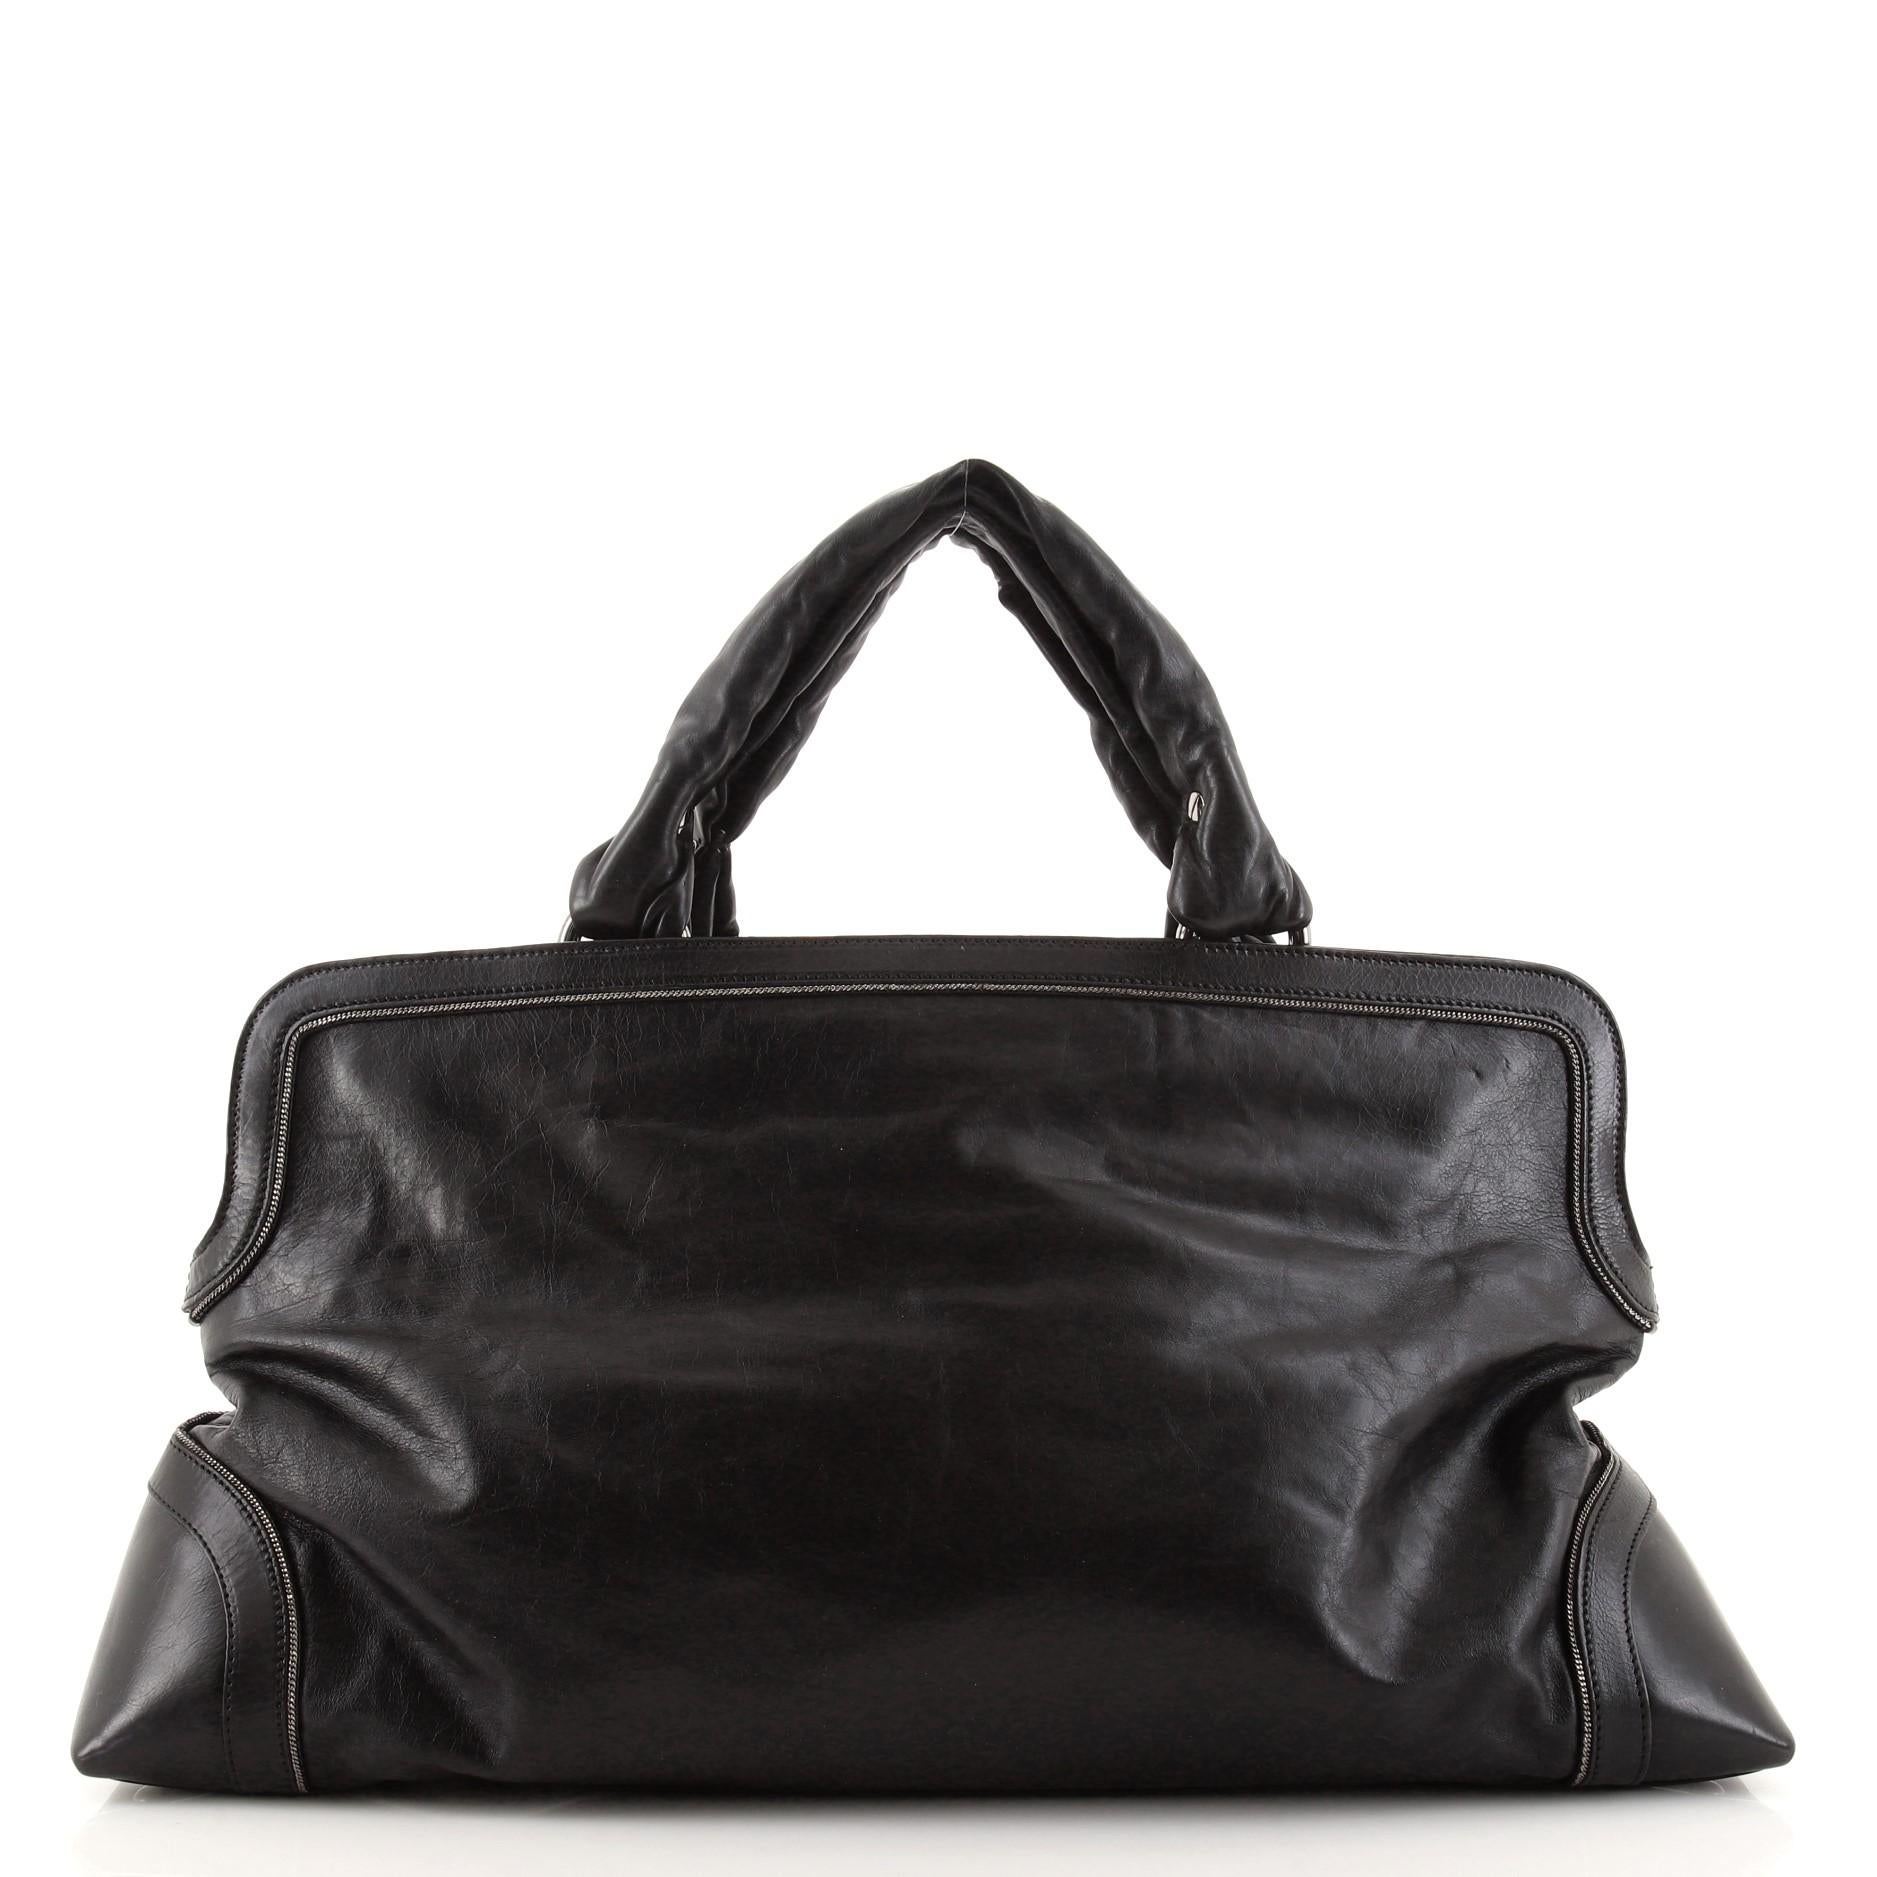 Black Chanel Soho Tote Leather East West